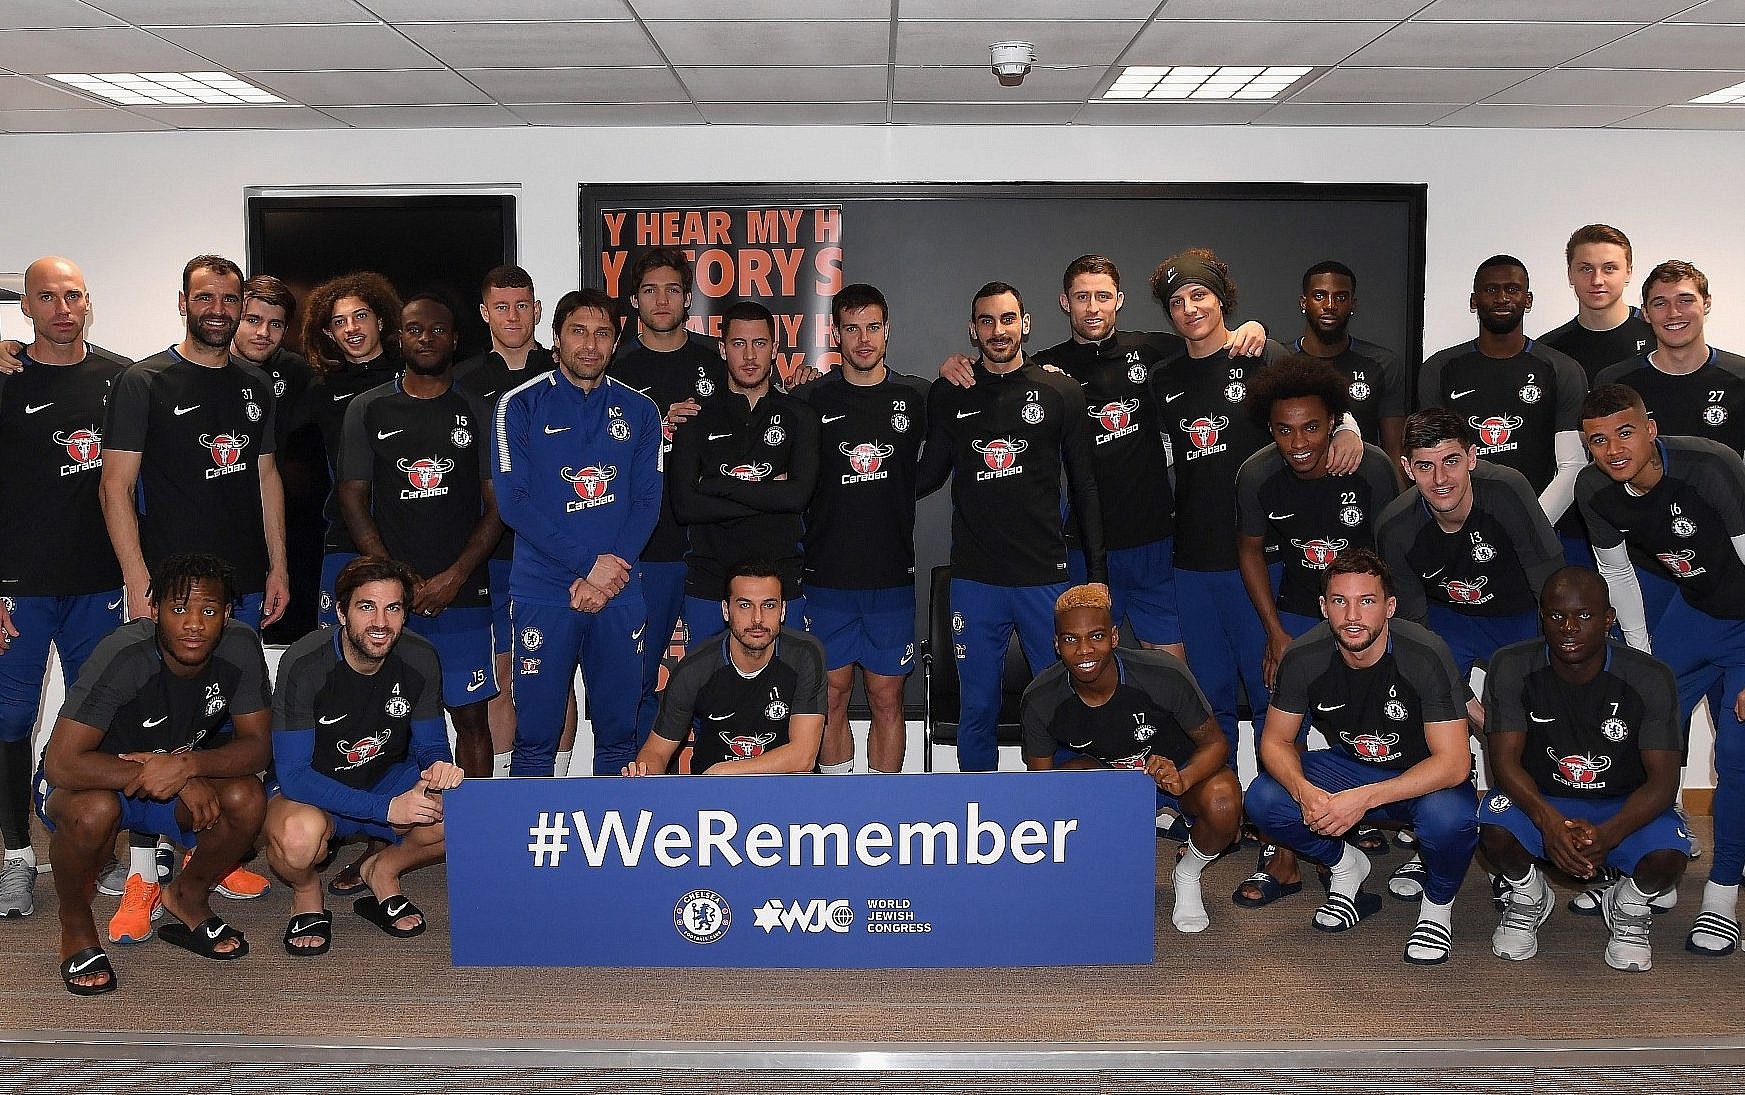 UK's Chelsea soccer club joins campaign to battle anti-Semitism | The